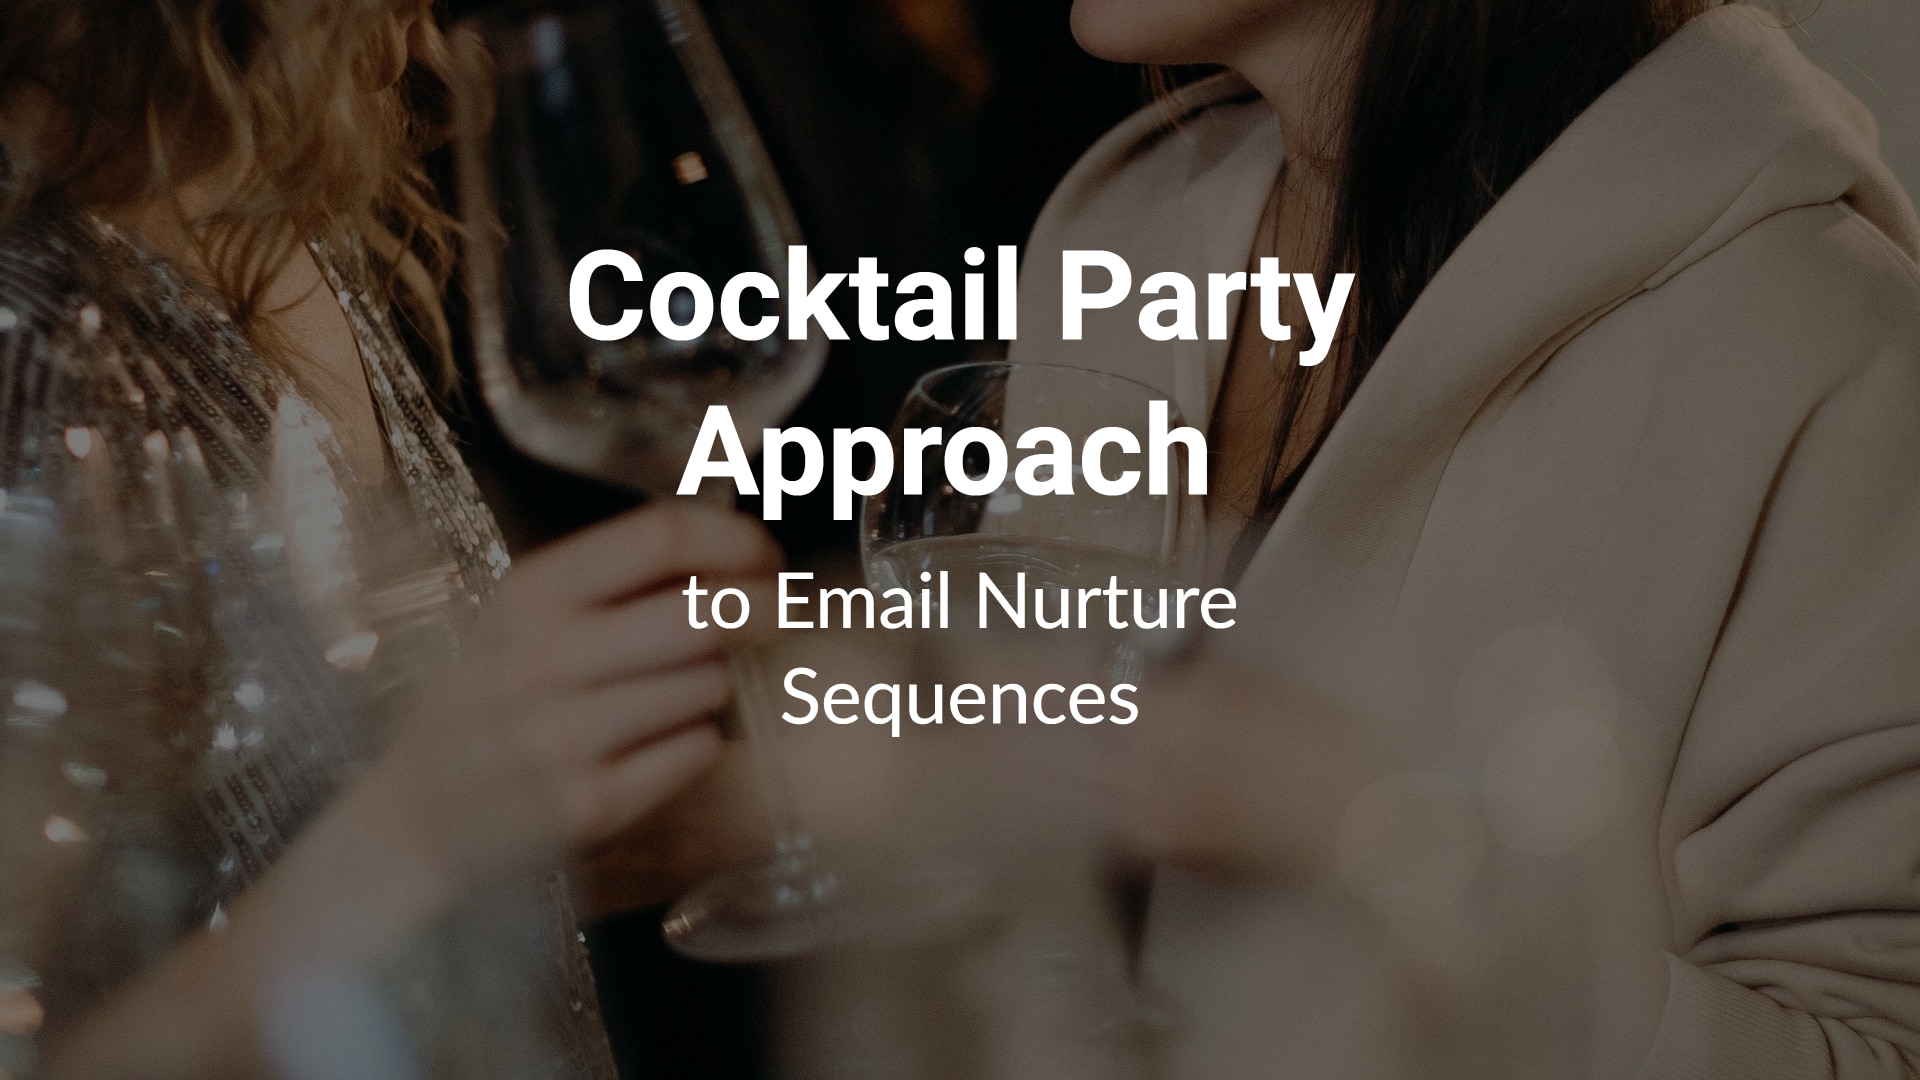 Cocktail party approach to email nurture sequences